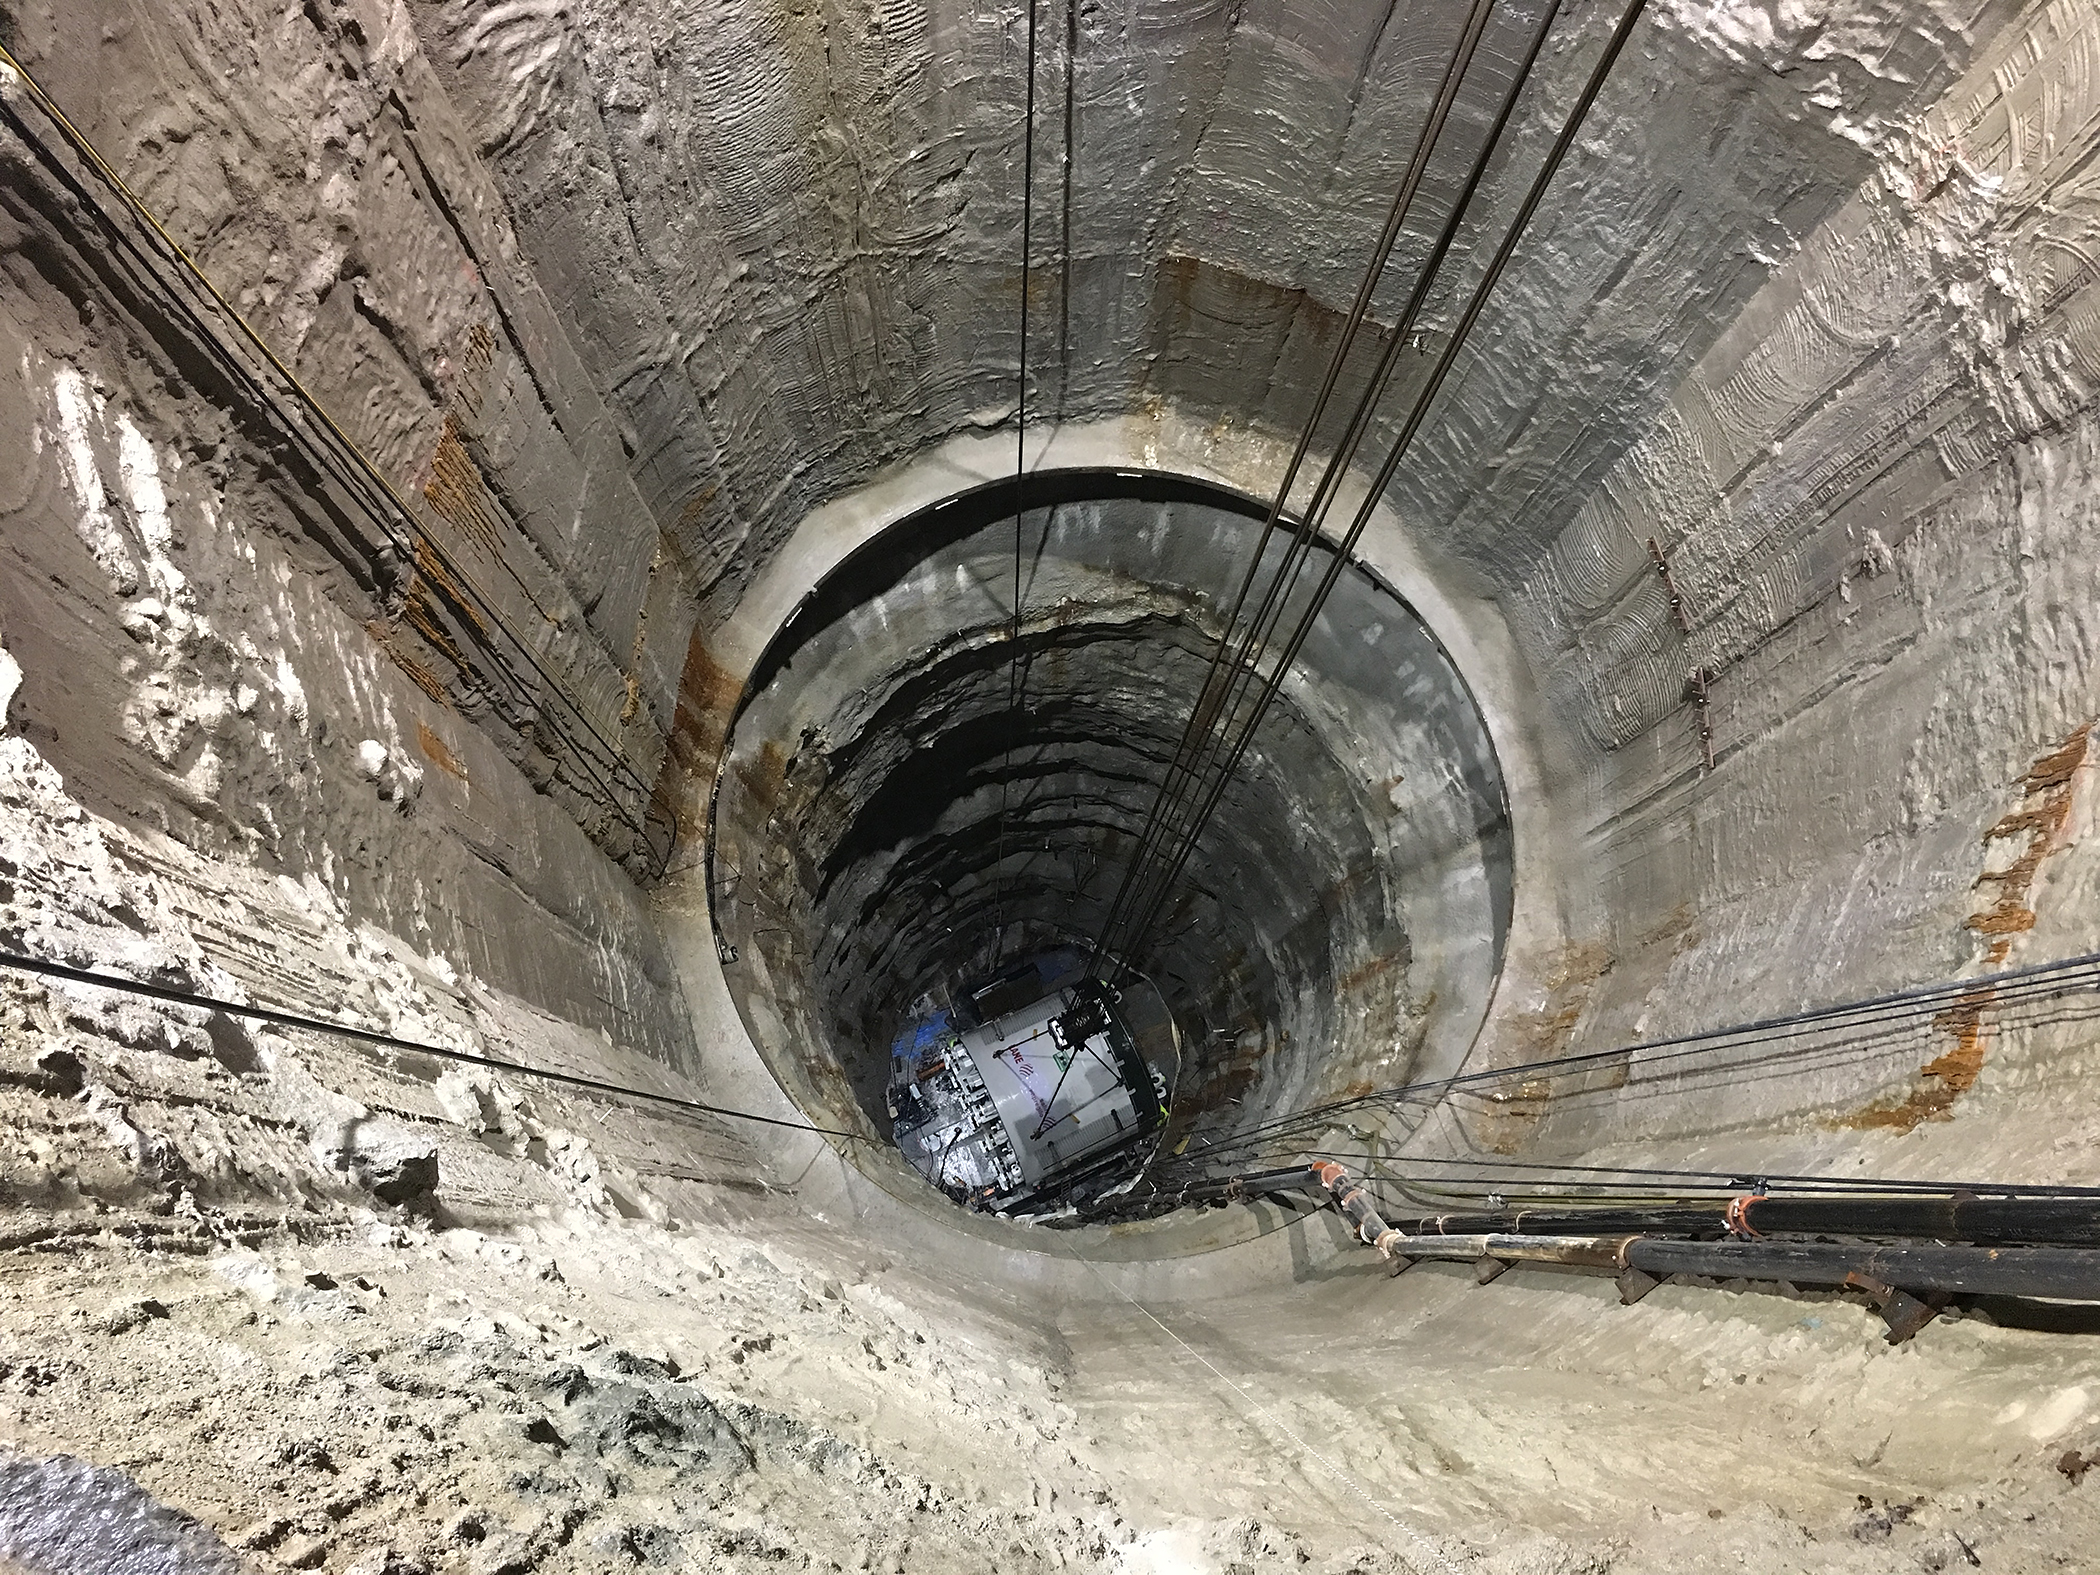 TBM Lowered into WS April 4 2019